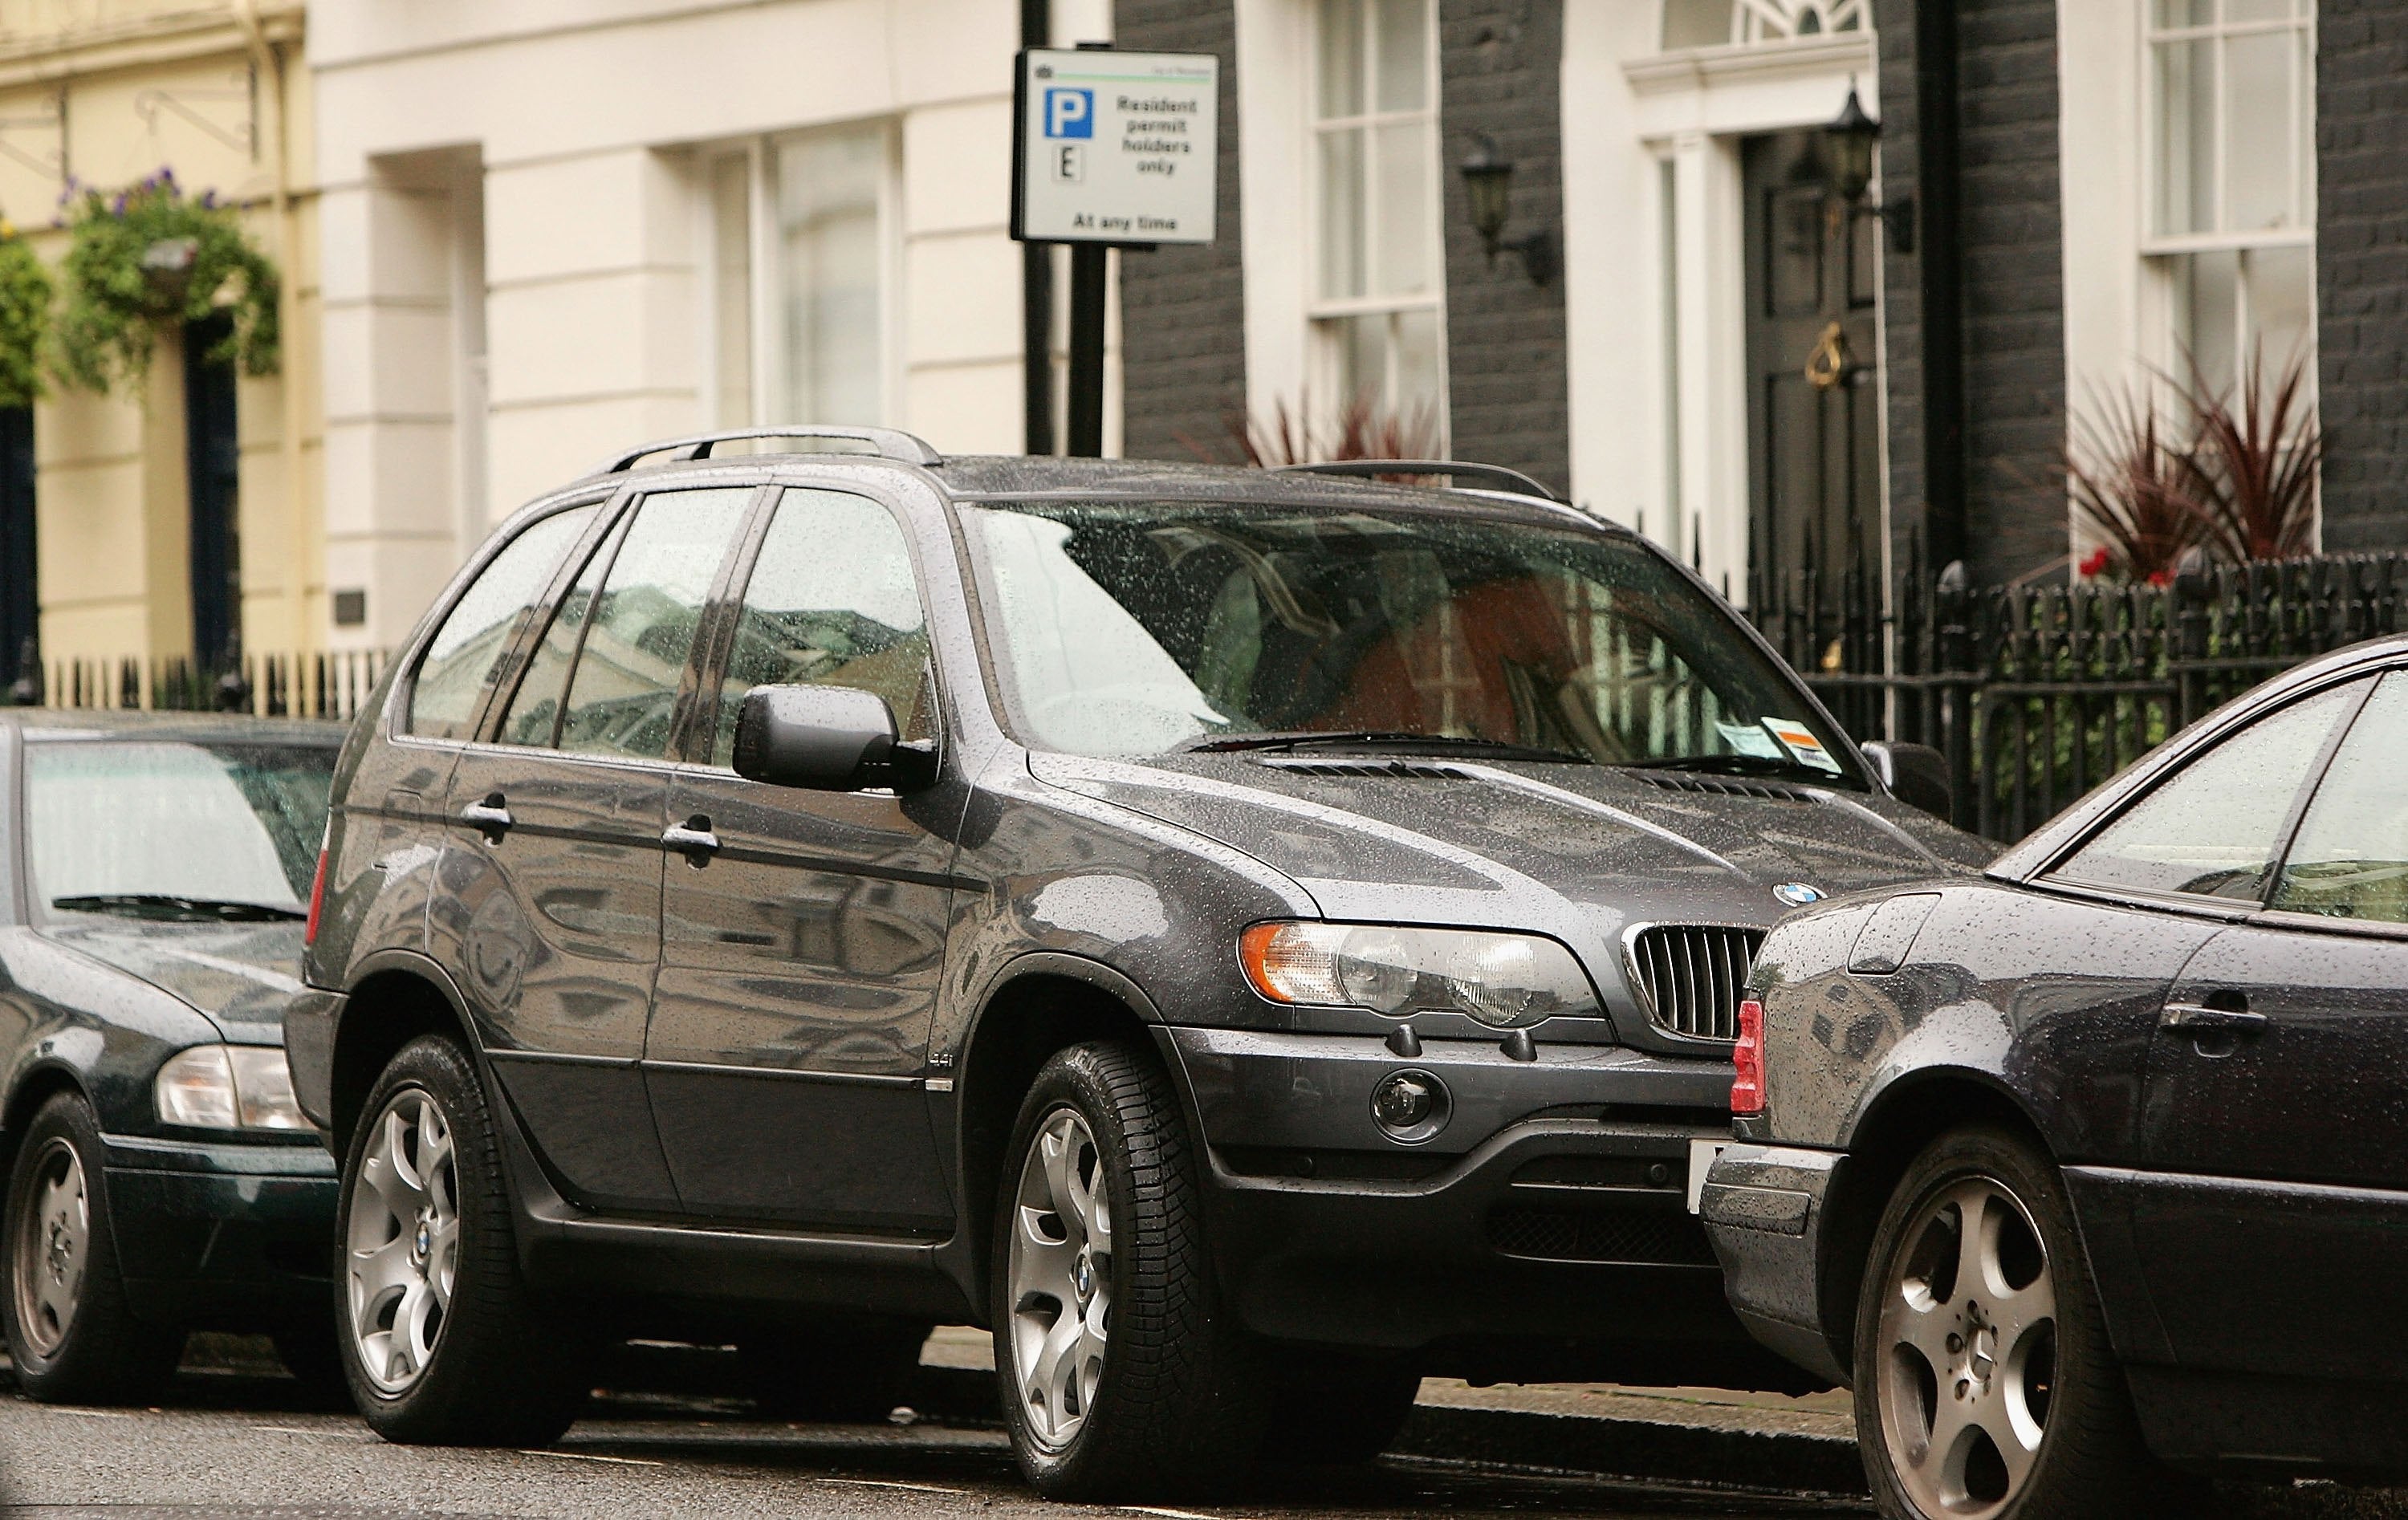 The growing popularity of SUVs in the UK is likely behind a recent rise in transport emissions